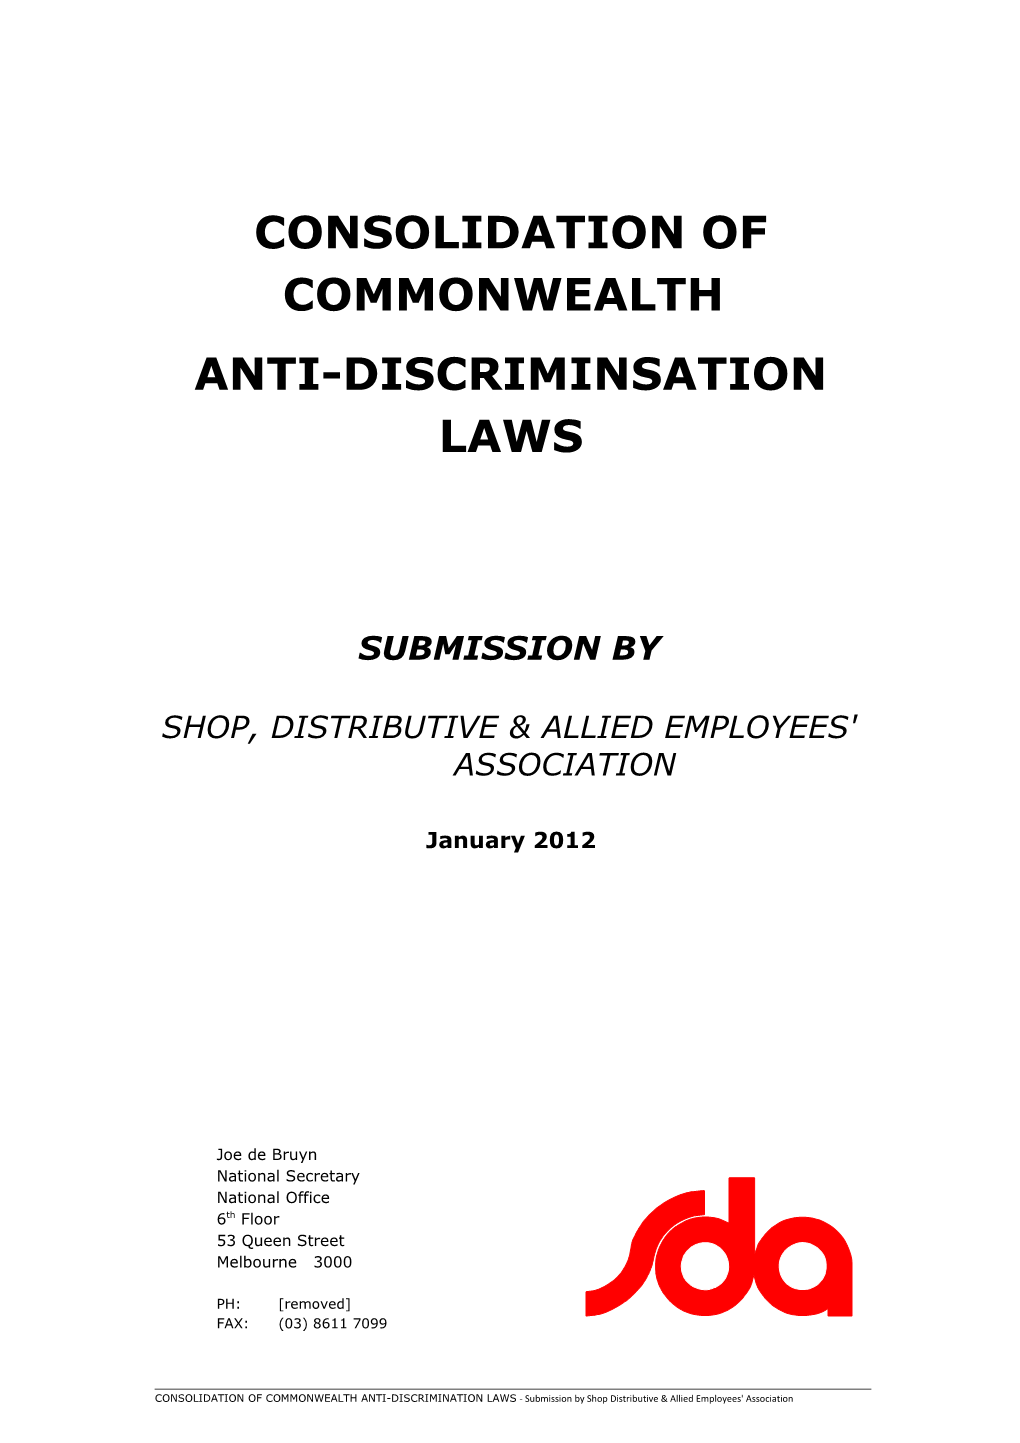 Submission on the Consolidation of Commonwealth Anti-Discrimination Laws - Shop, Distributive